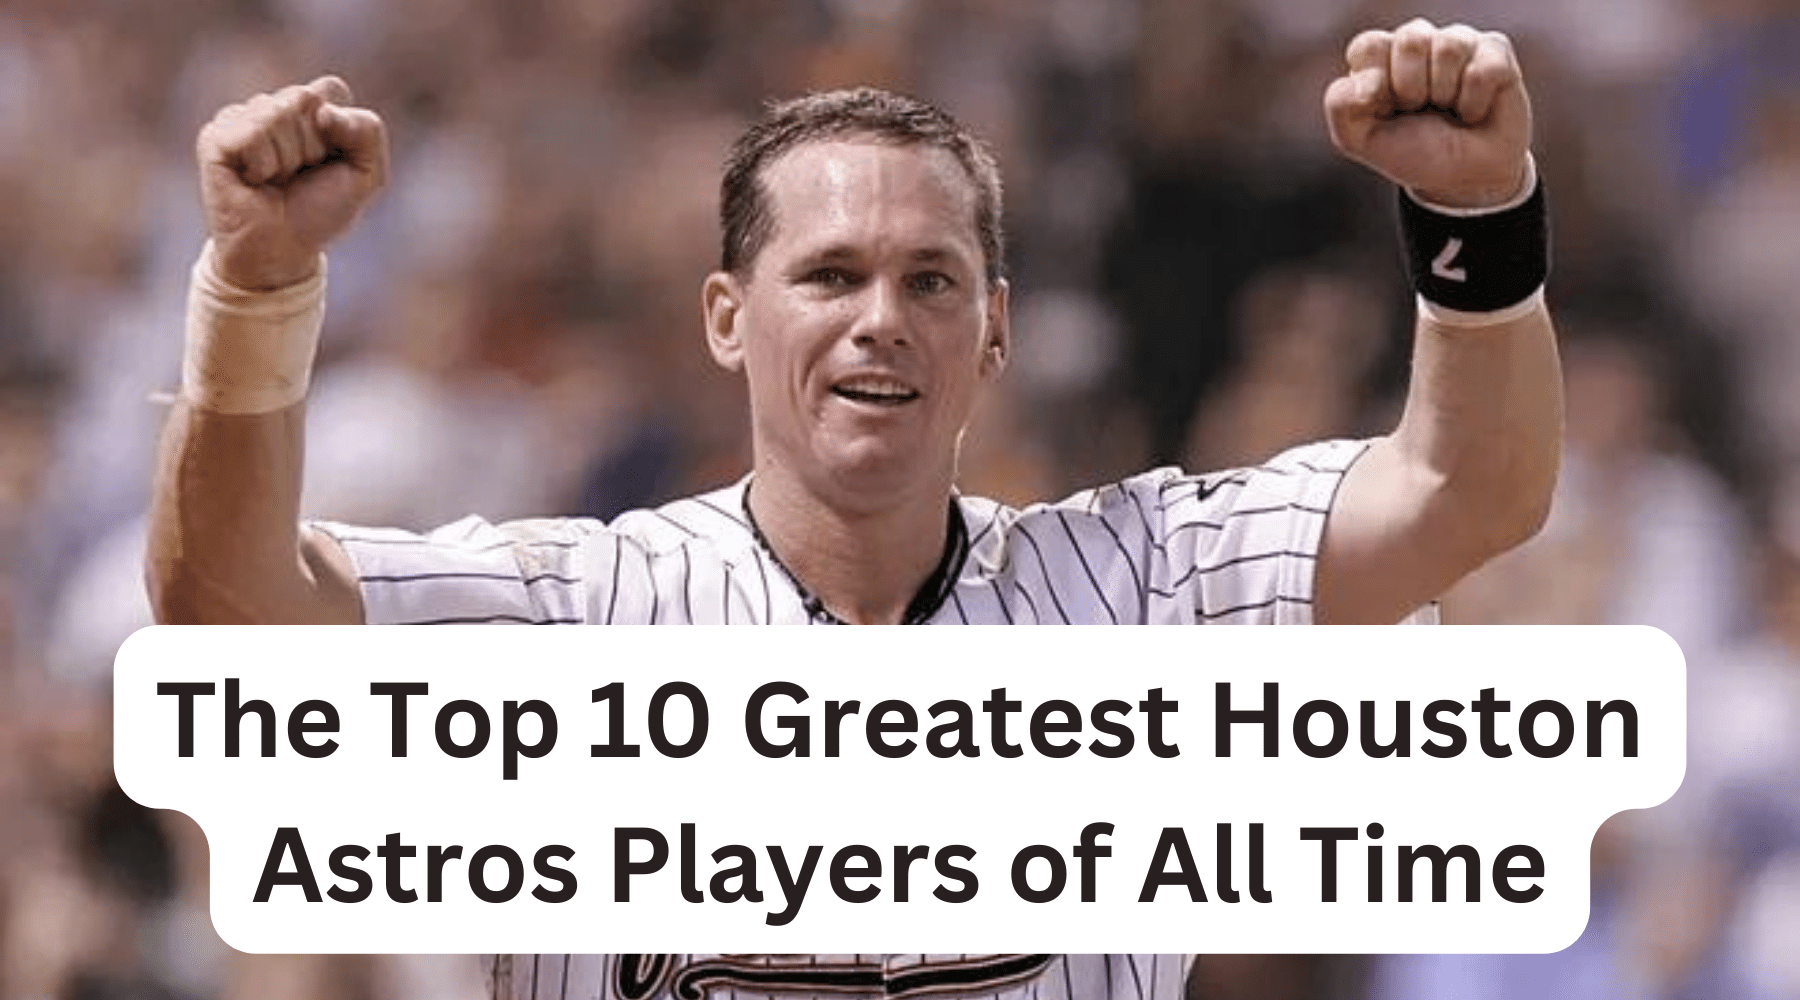 The Top 10 Greatest Houston Astros Players of All Time